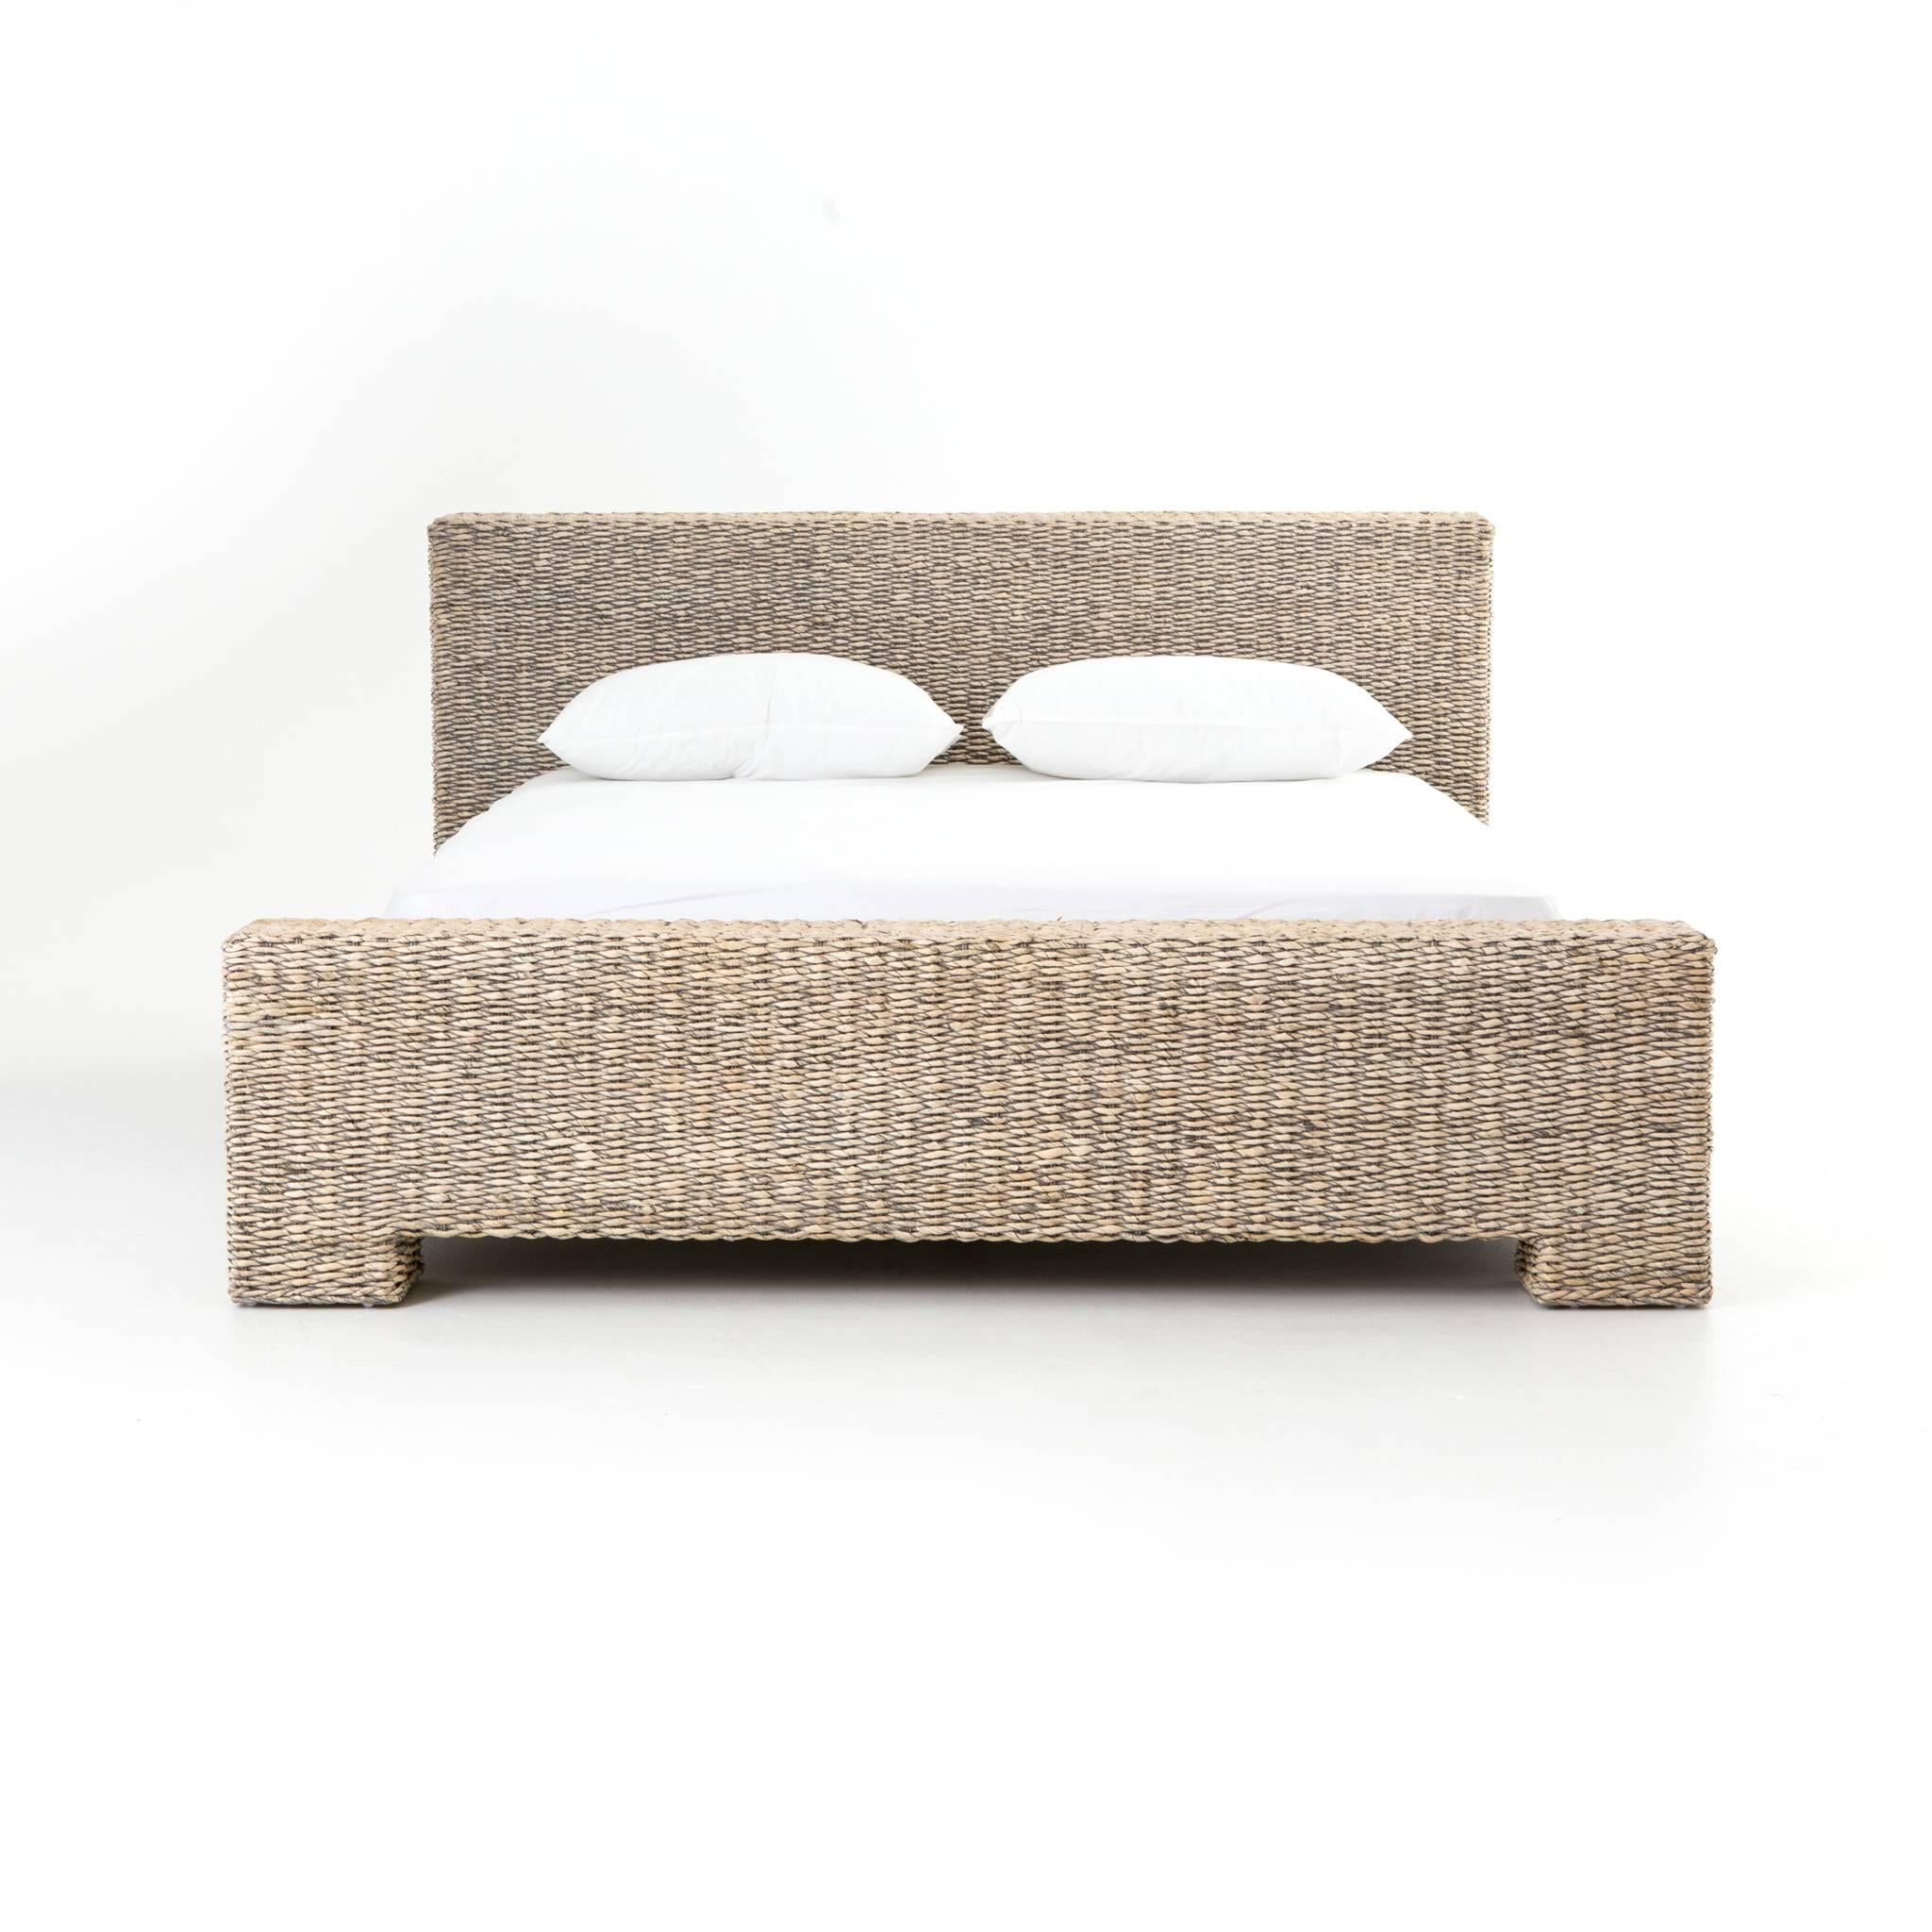 Modern, beachy style rattan low profile bed, available in king and queen-size.
Queen $2250
King $2650.W: 85.5; D: 97.5 H: 36

Low stock, check with us for availablity
  